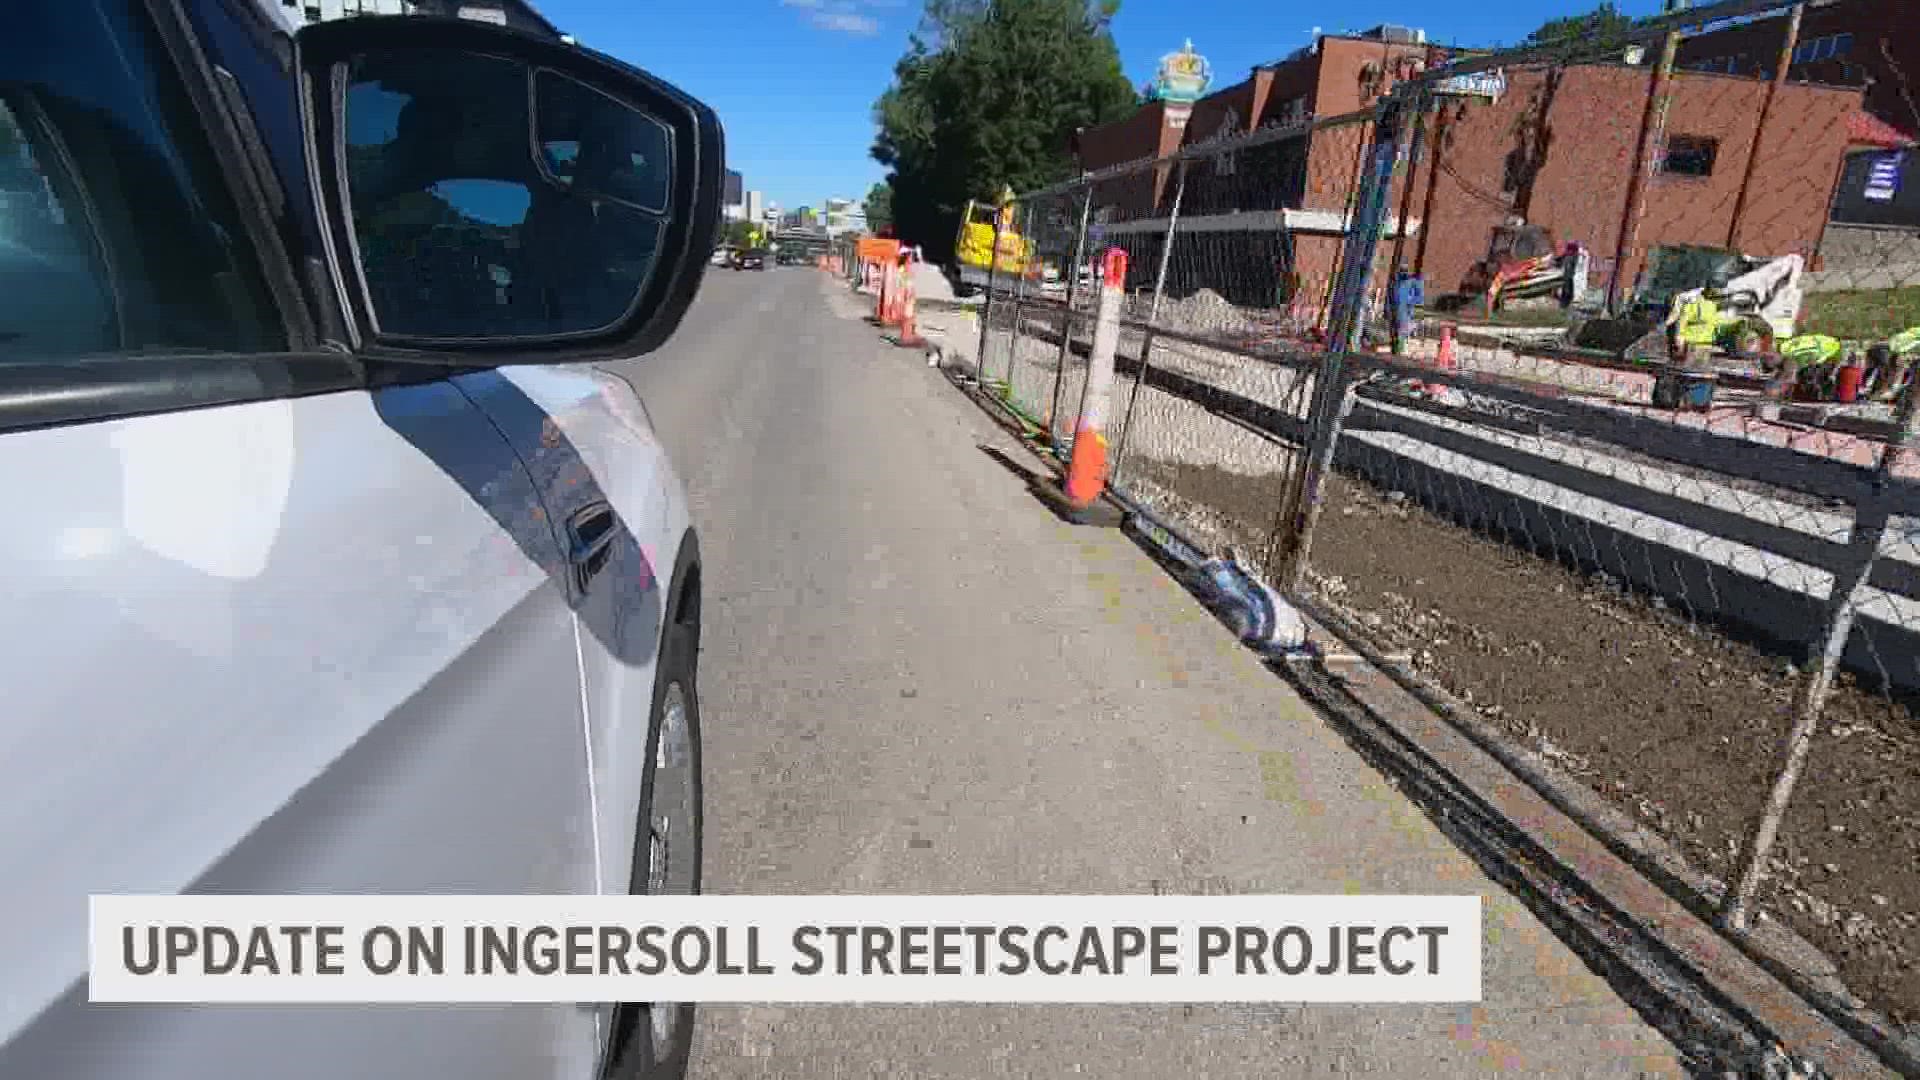 Phase three of the Ingersoll Streetscape Project is slated to wrap up this fall.